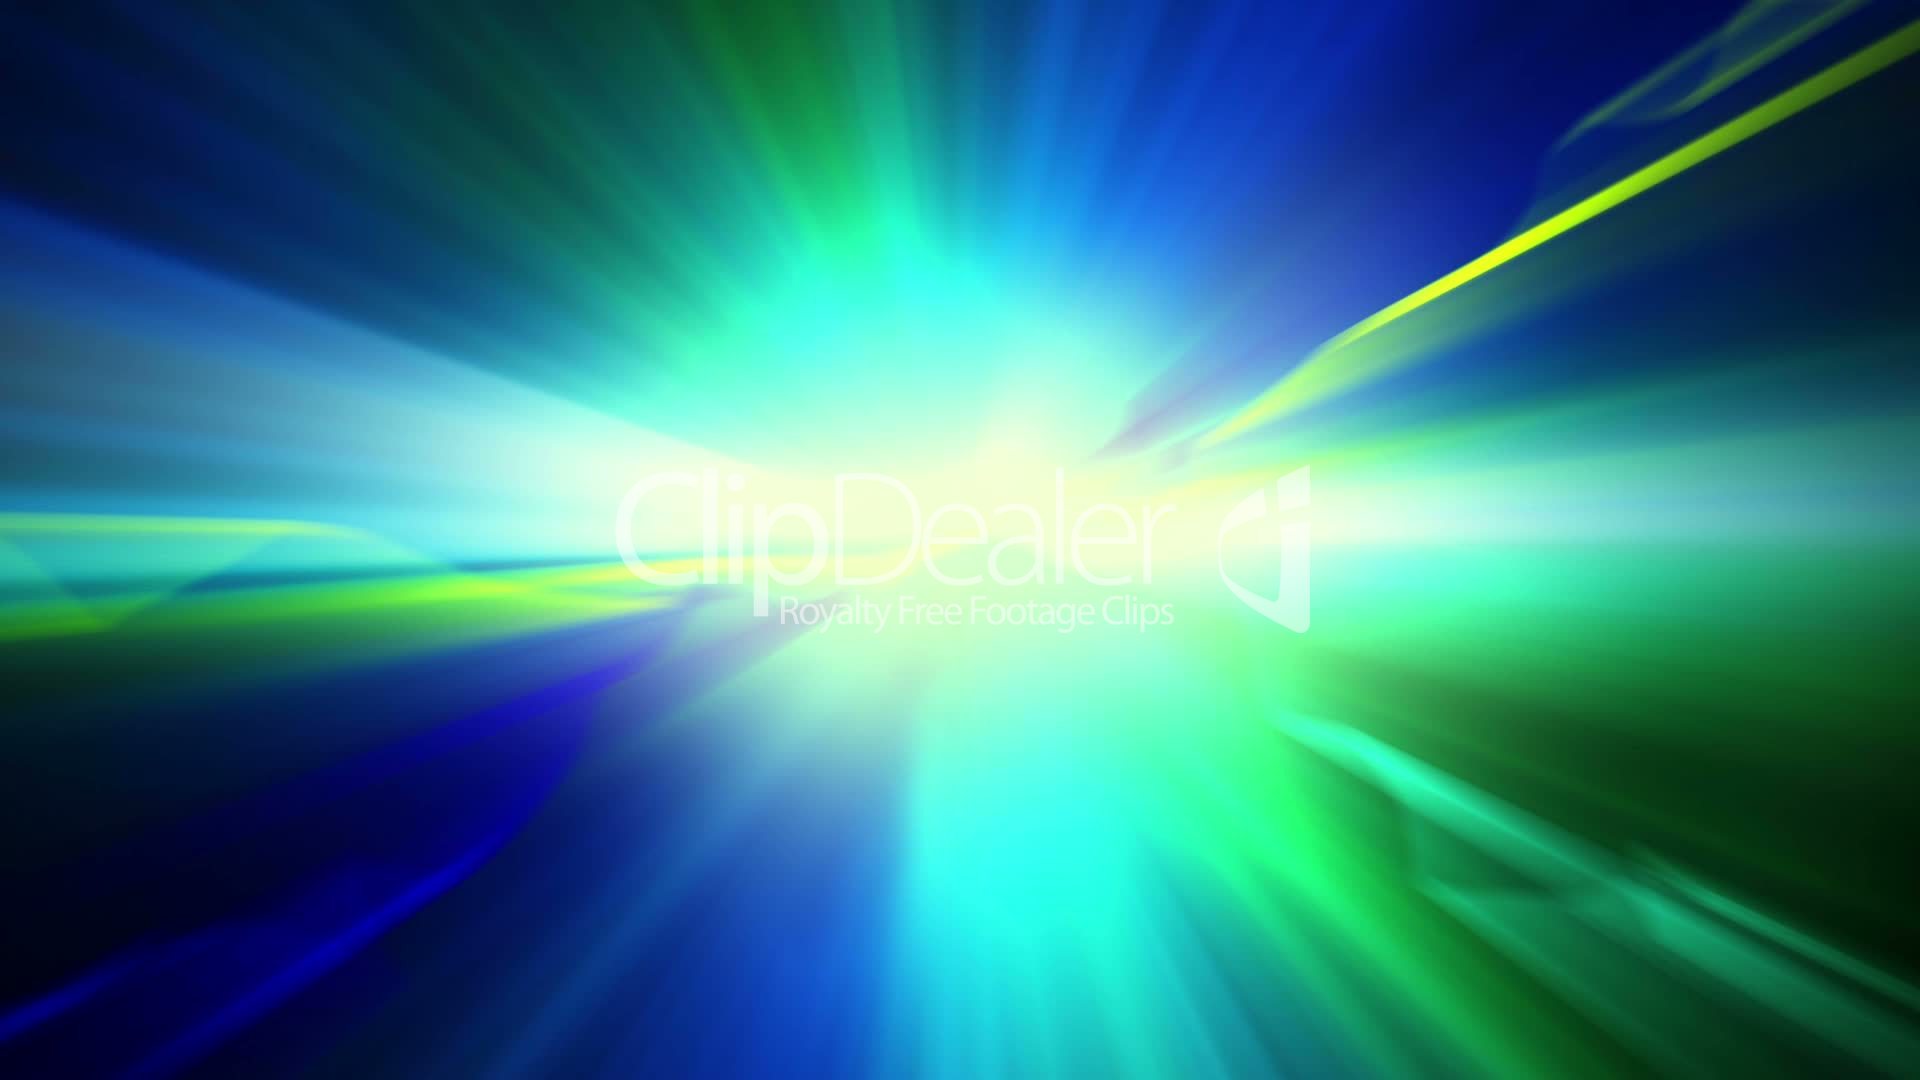 blue green shiny light loopable background: Royalty-free video and